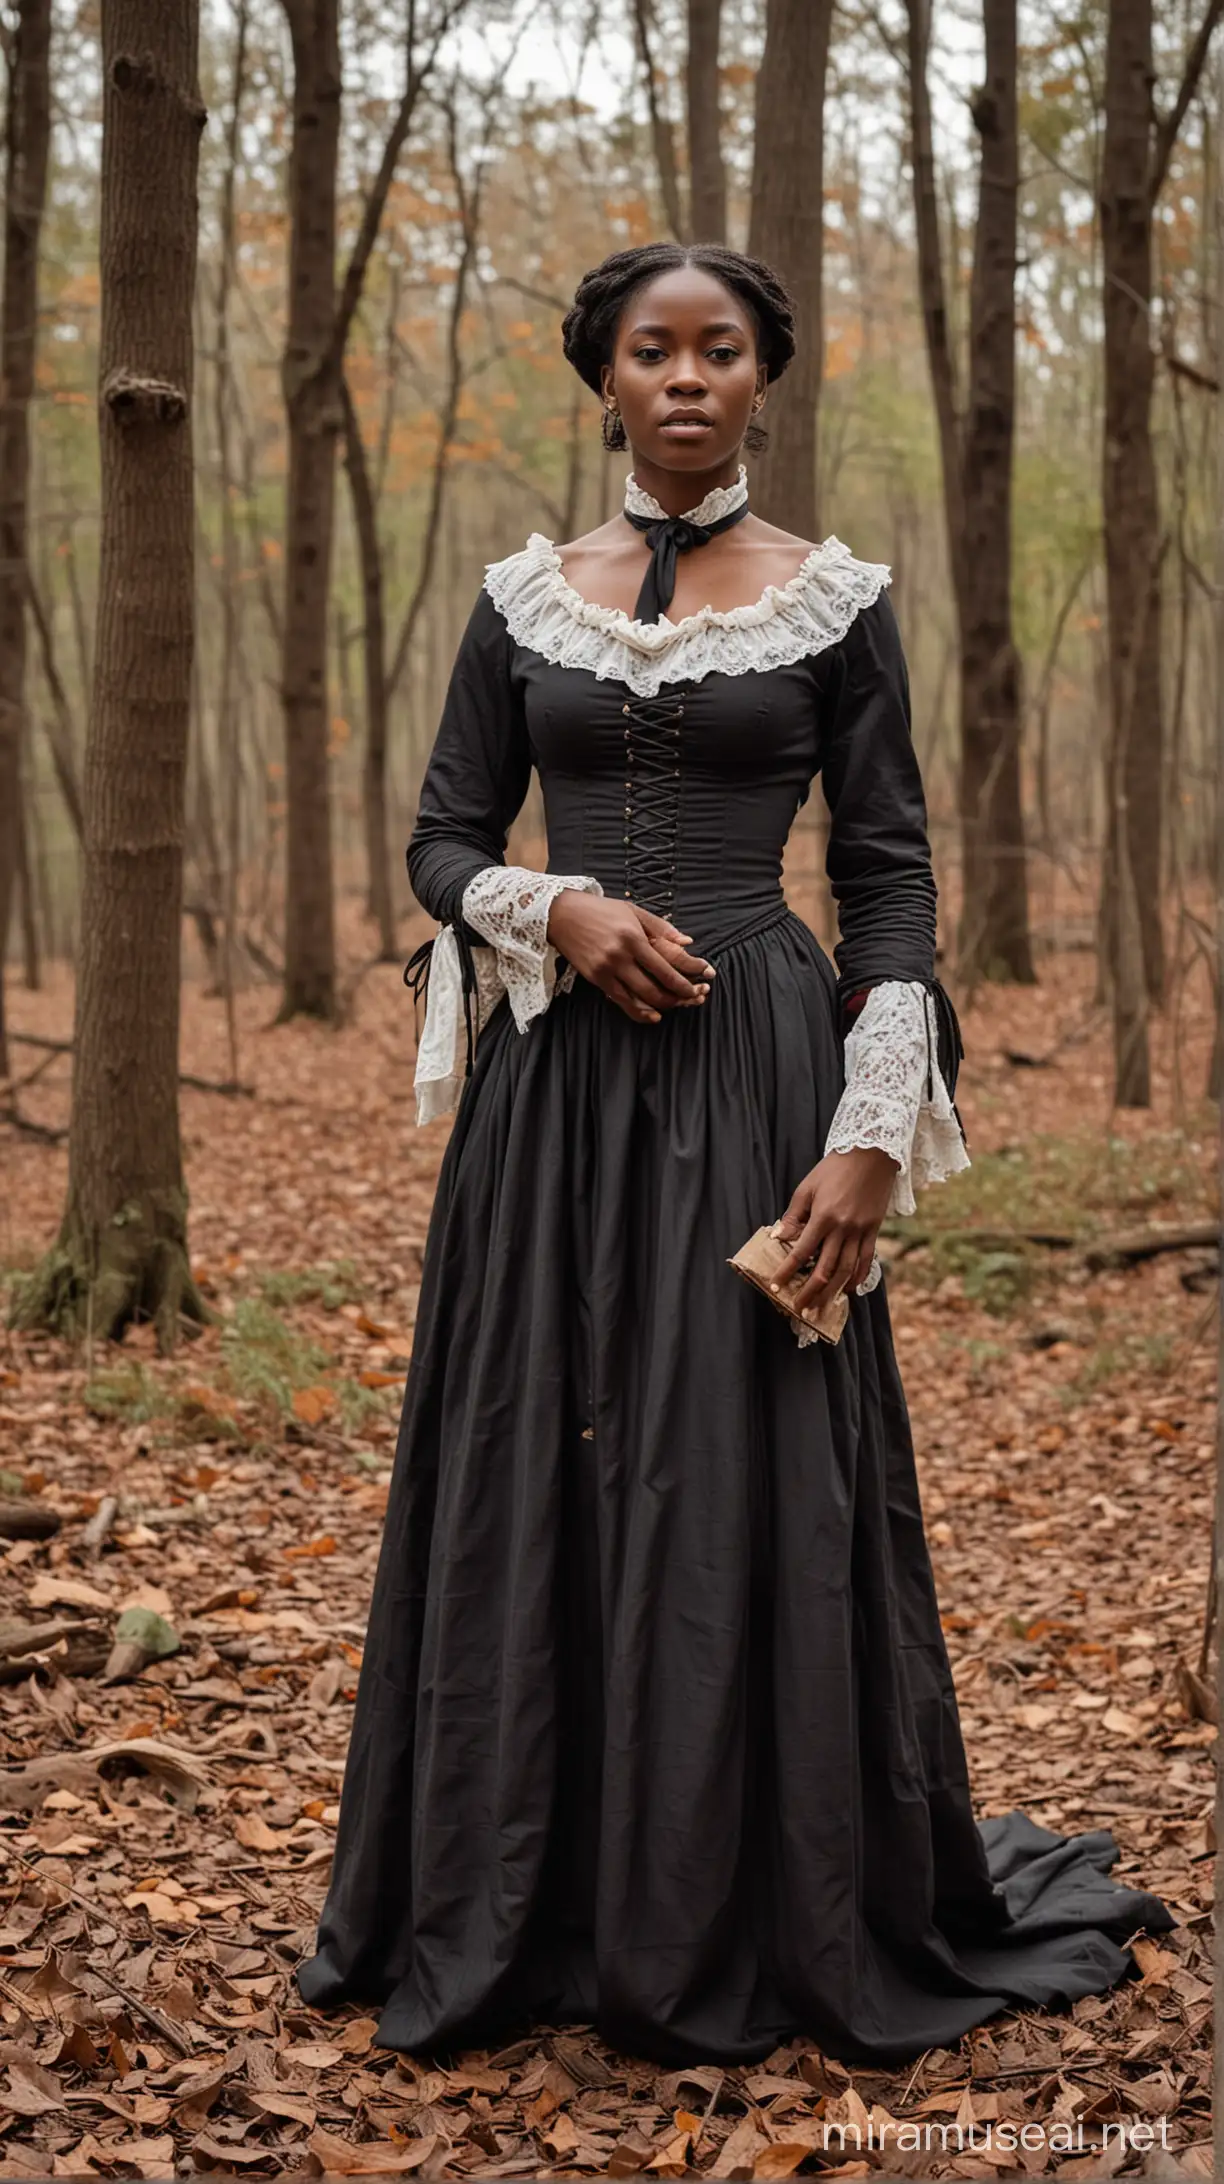 Historical Portrait Black Female Slave Queen in the Woods